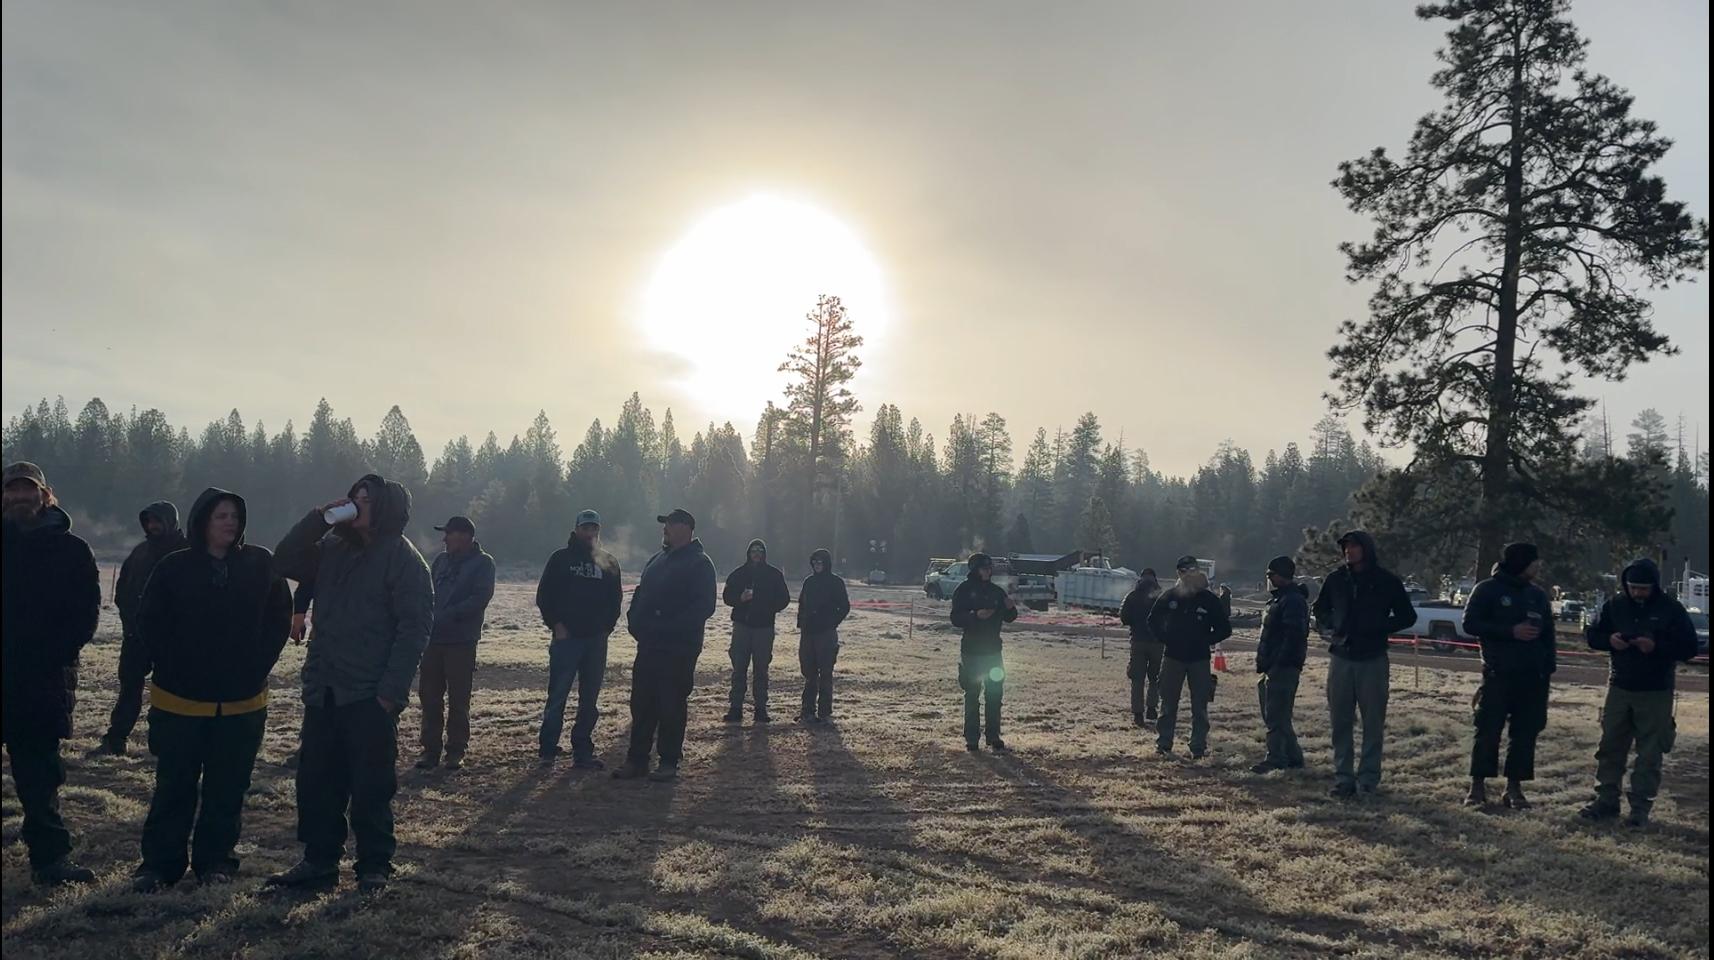 A group of firefighters cast a silhouette with the rising sun